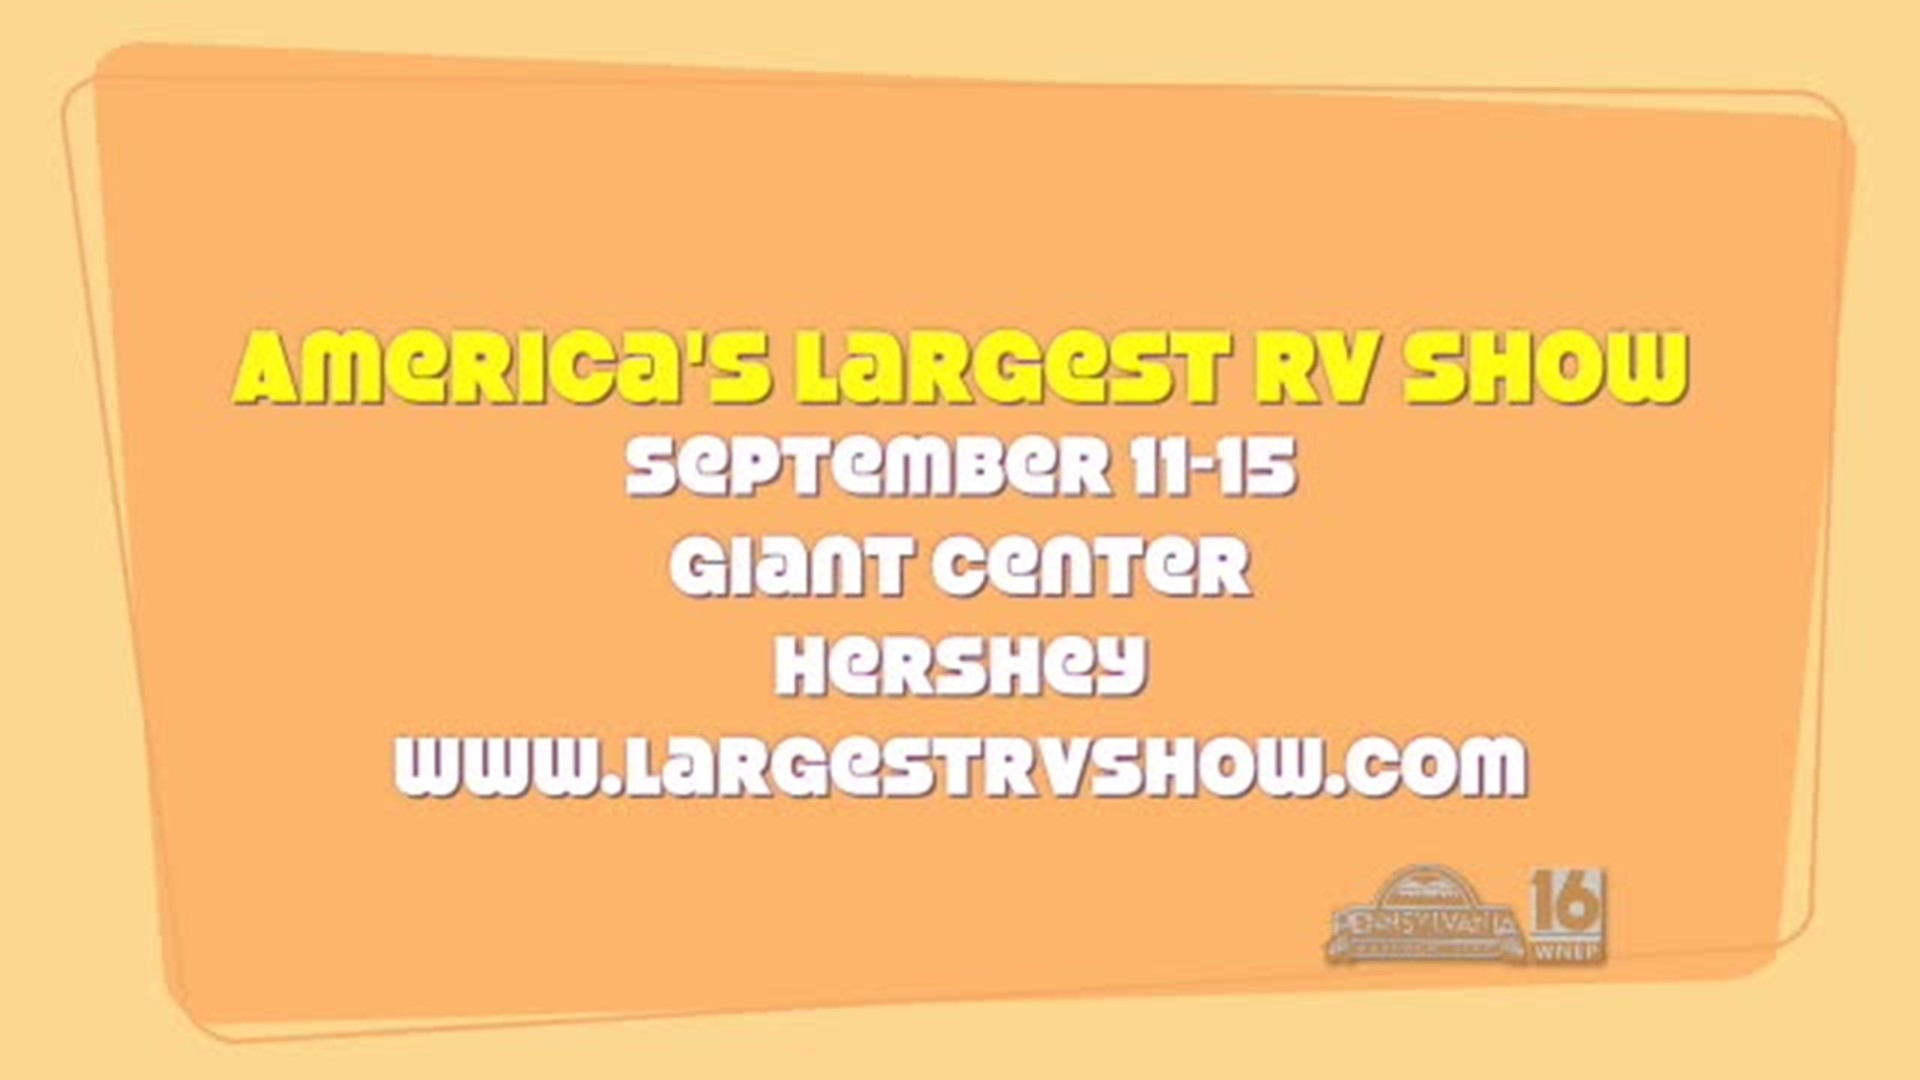 America's Largest RV Show Ticket Giveaway